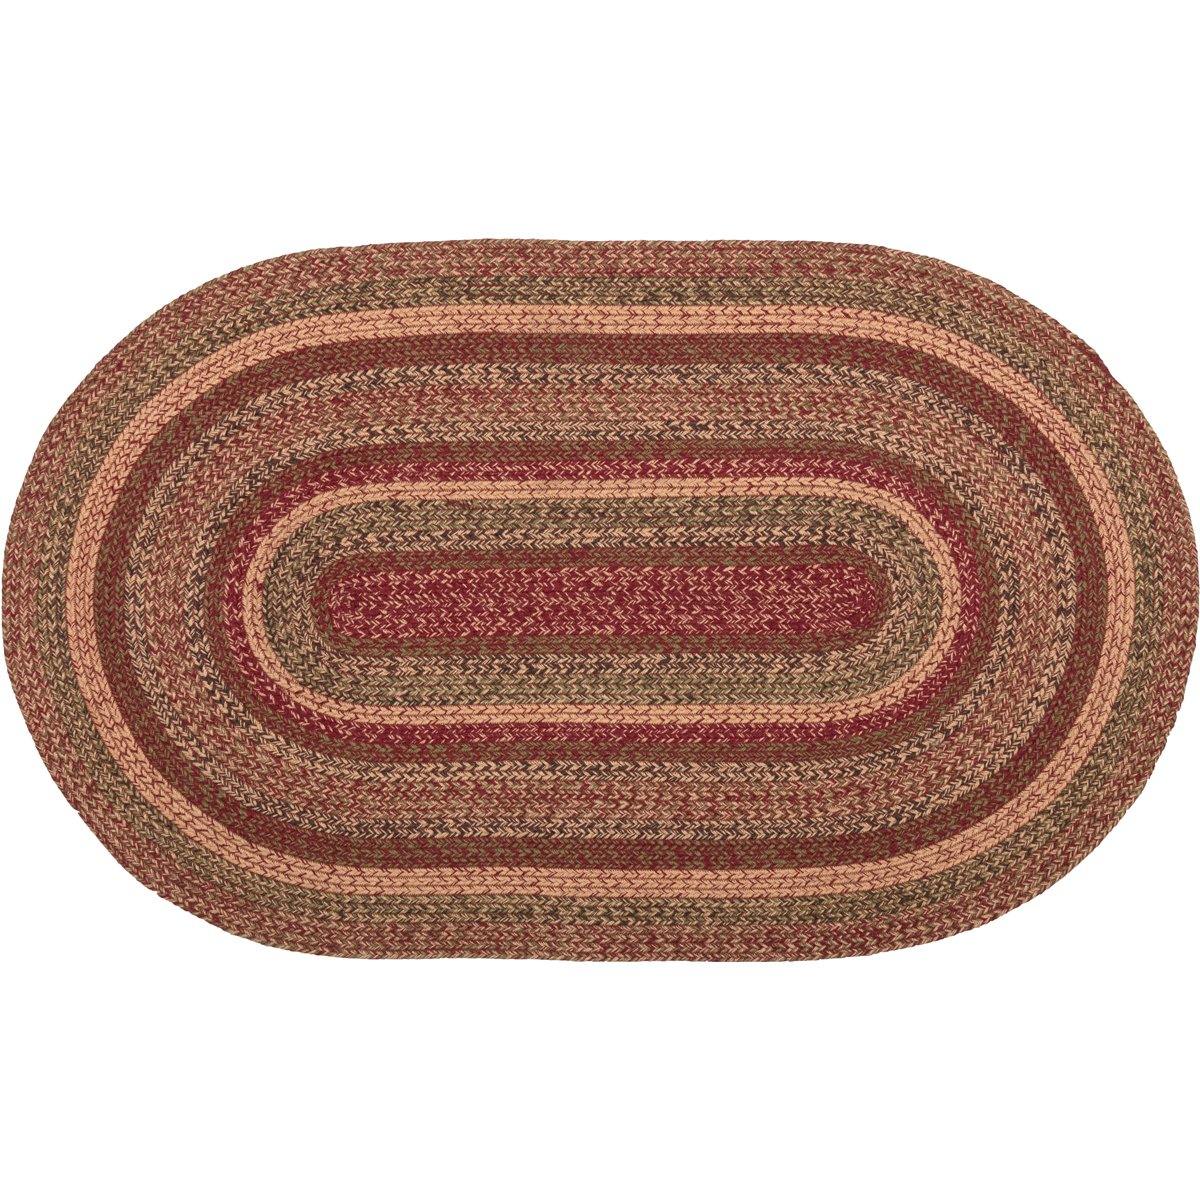 Cider Mill Jute Braided Rug Oval 3'x5' with Rug Pad VHC Brands - The Fox Decor